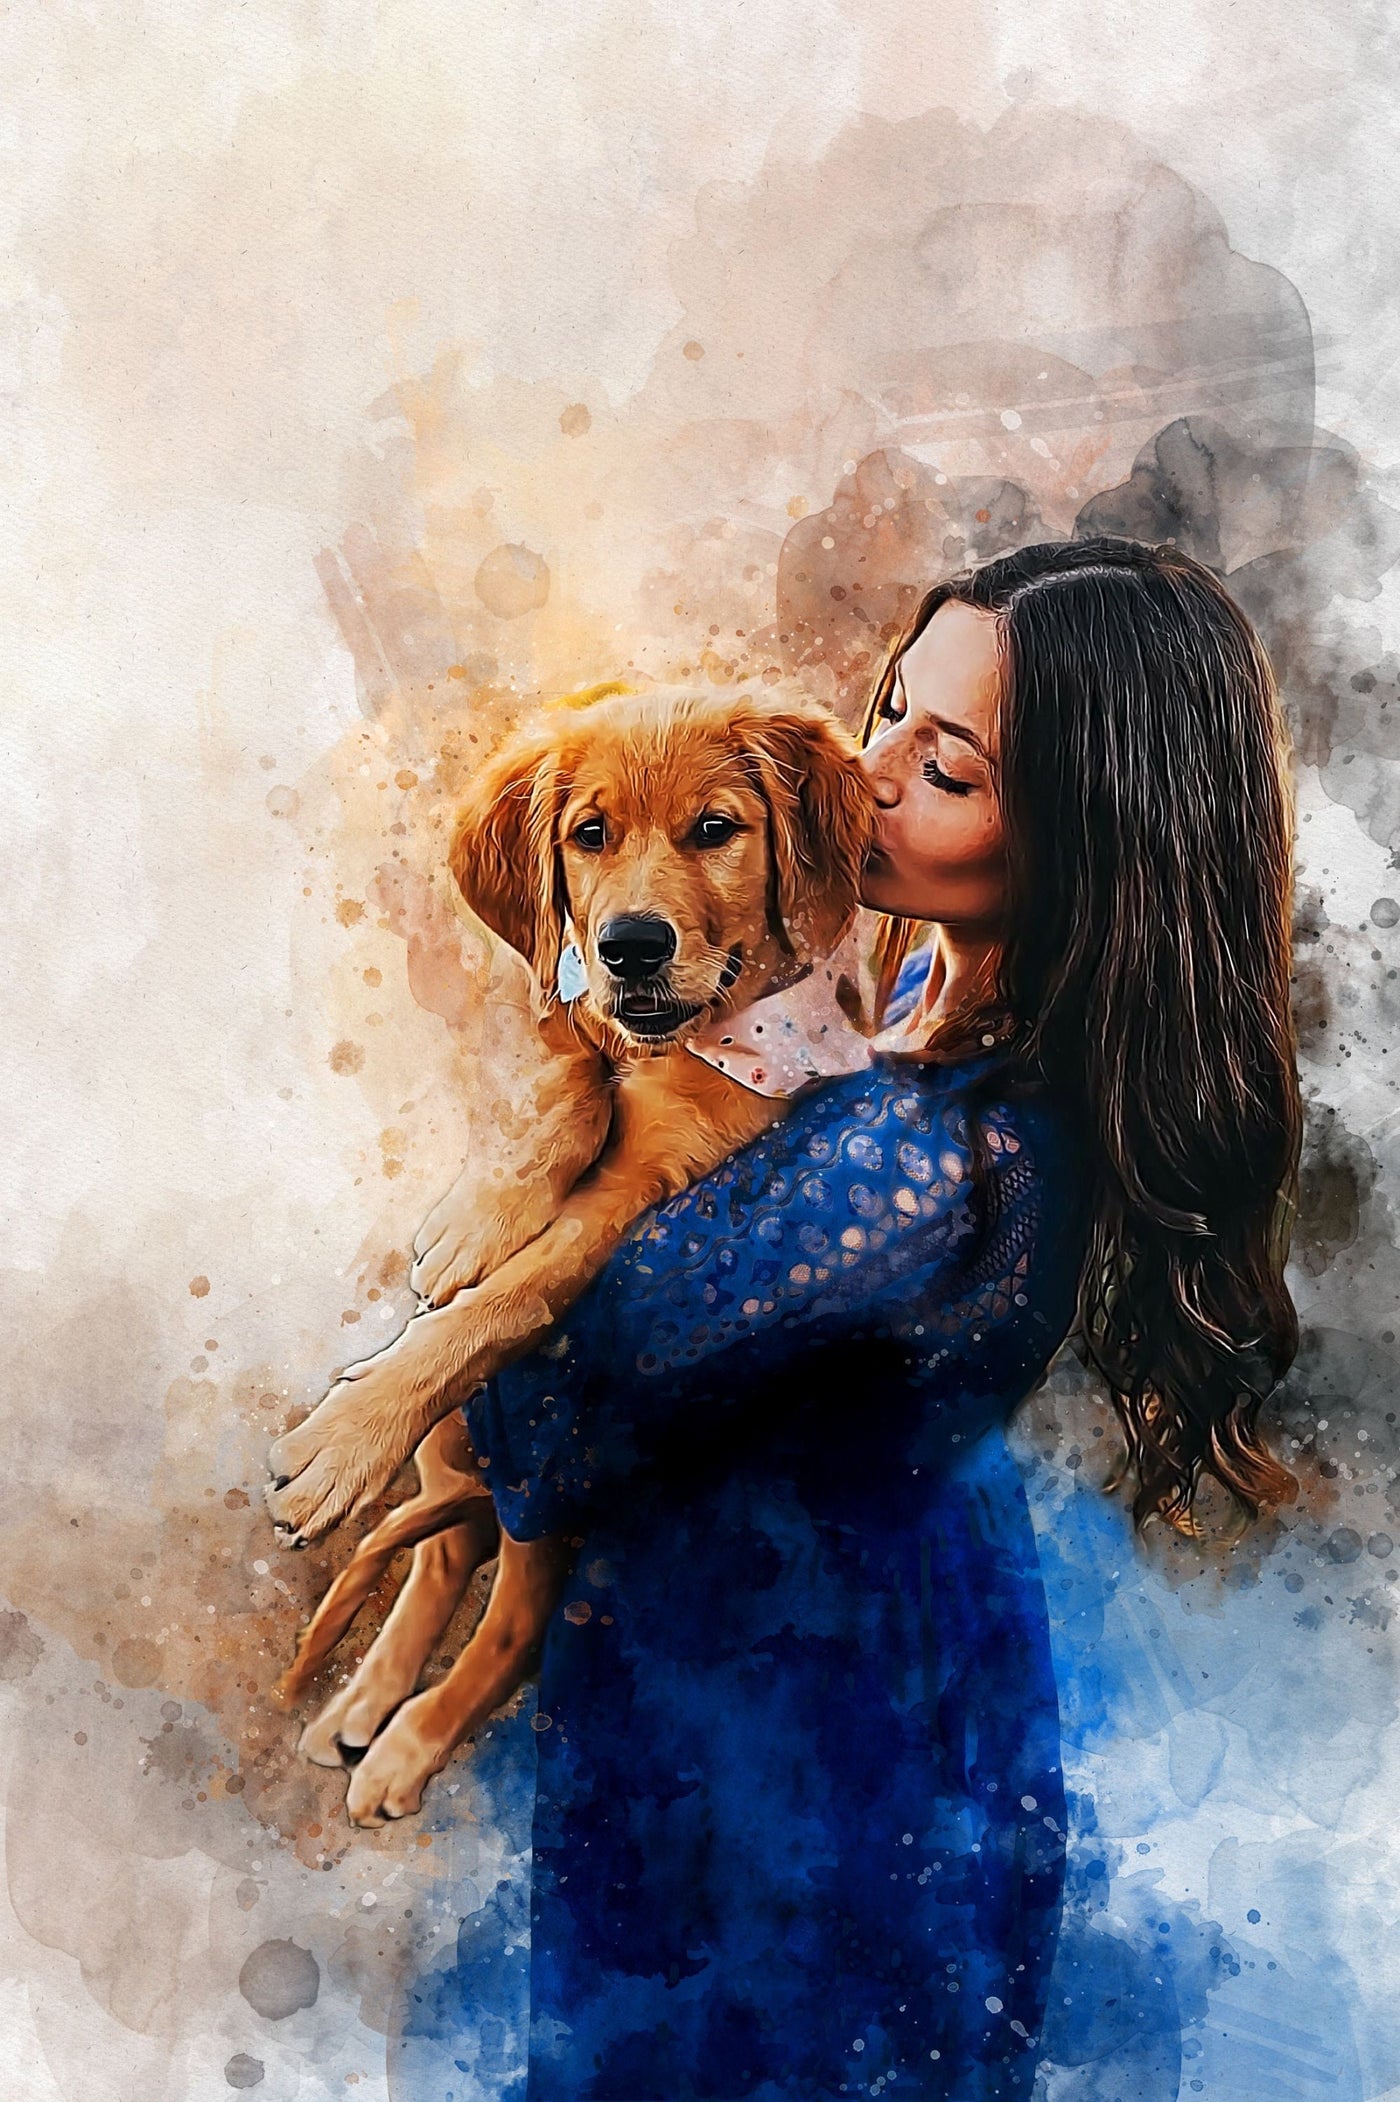 Personalized Dog Lover Gift for Women | Canvas Prints with Dog Portraits